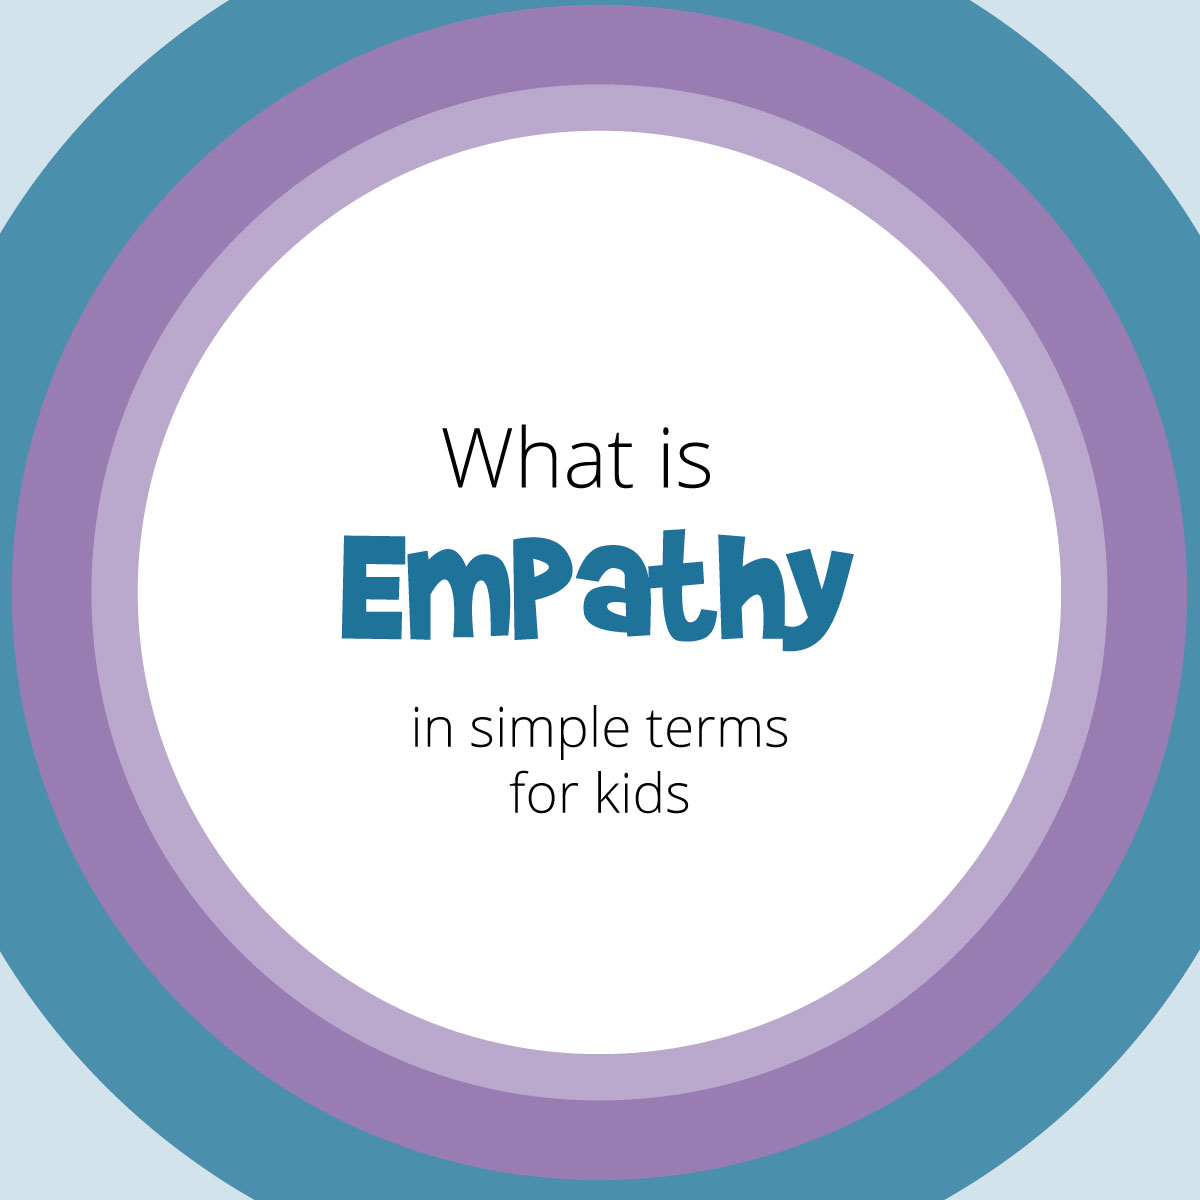 What is Empathy? An empathy definition for kids.